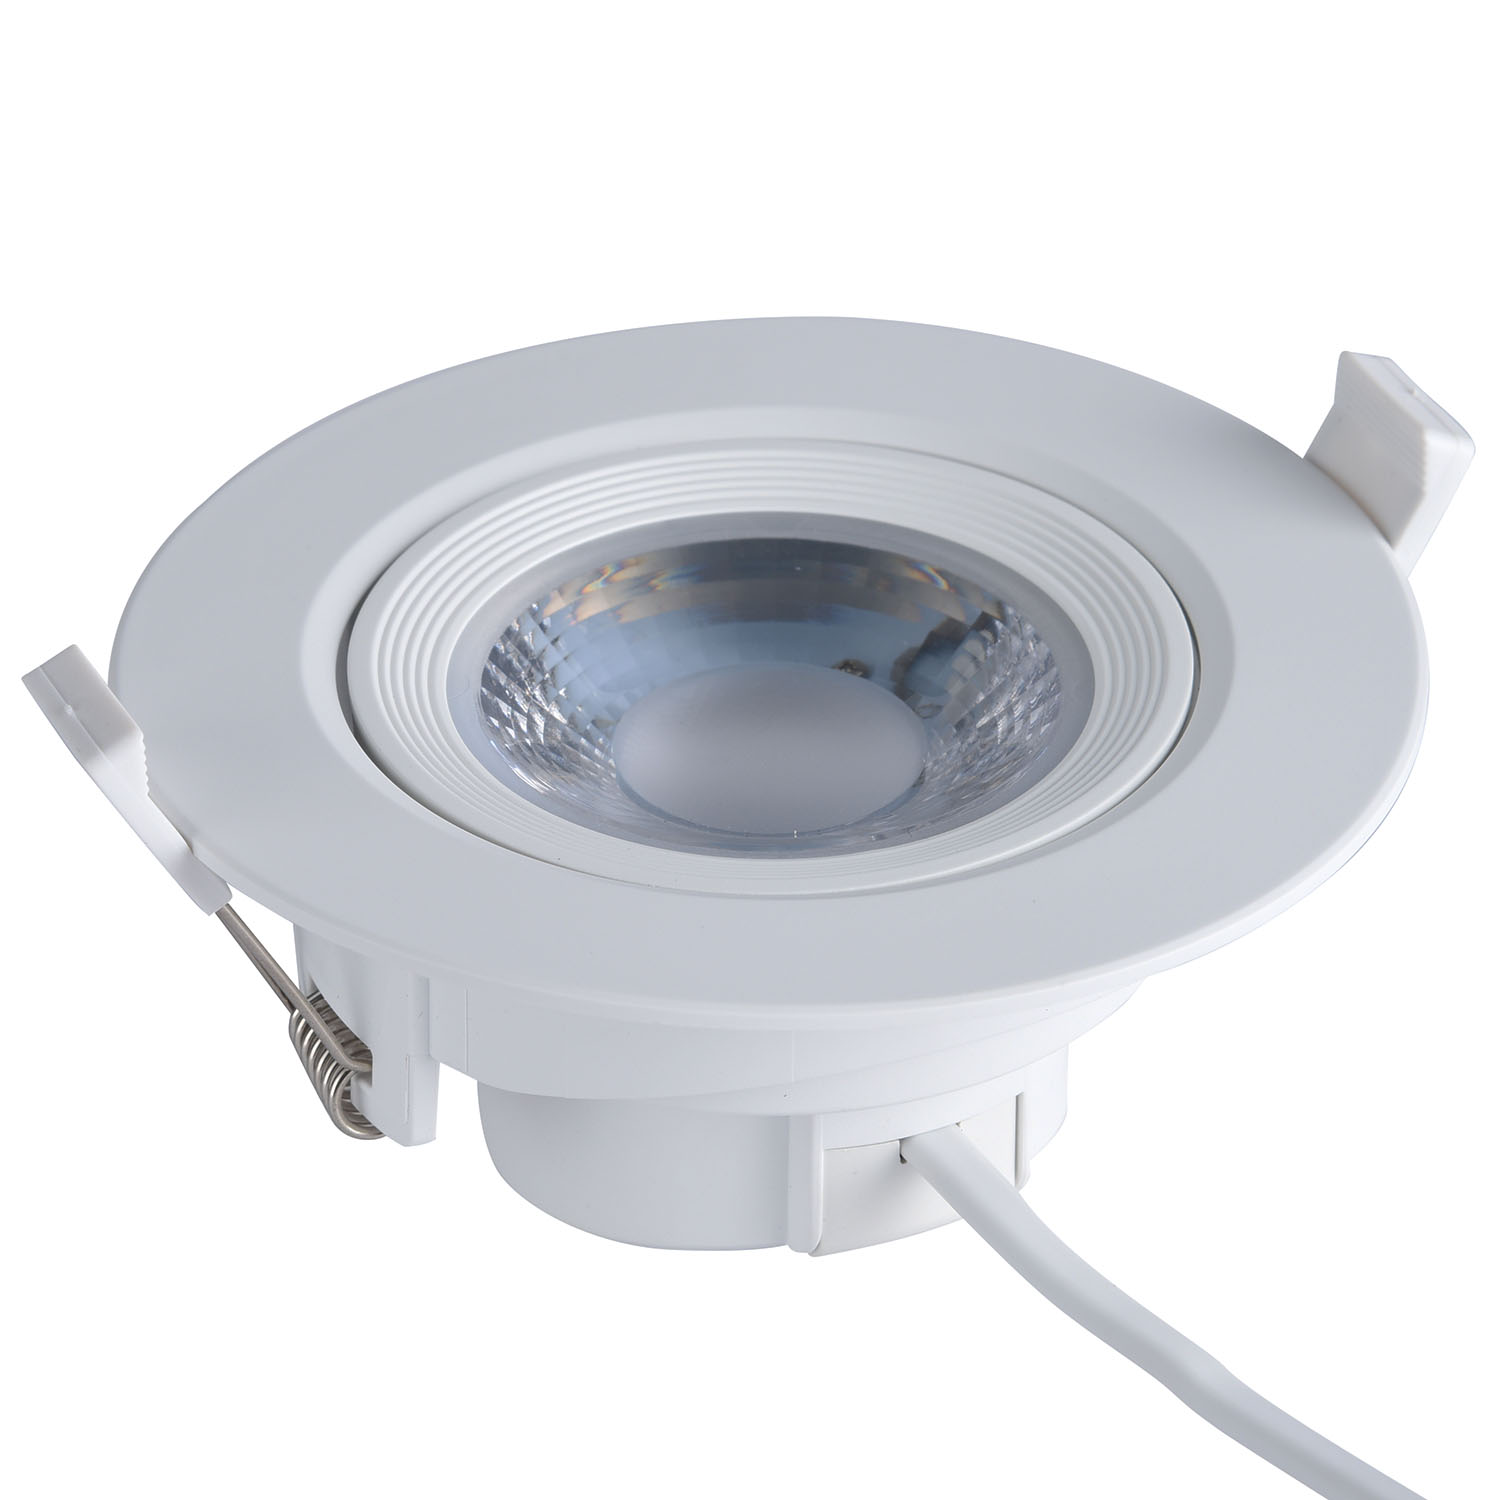 Directional 9W LED Recessed Spot Downlights Vaulted Ceiling LED Spot ...